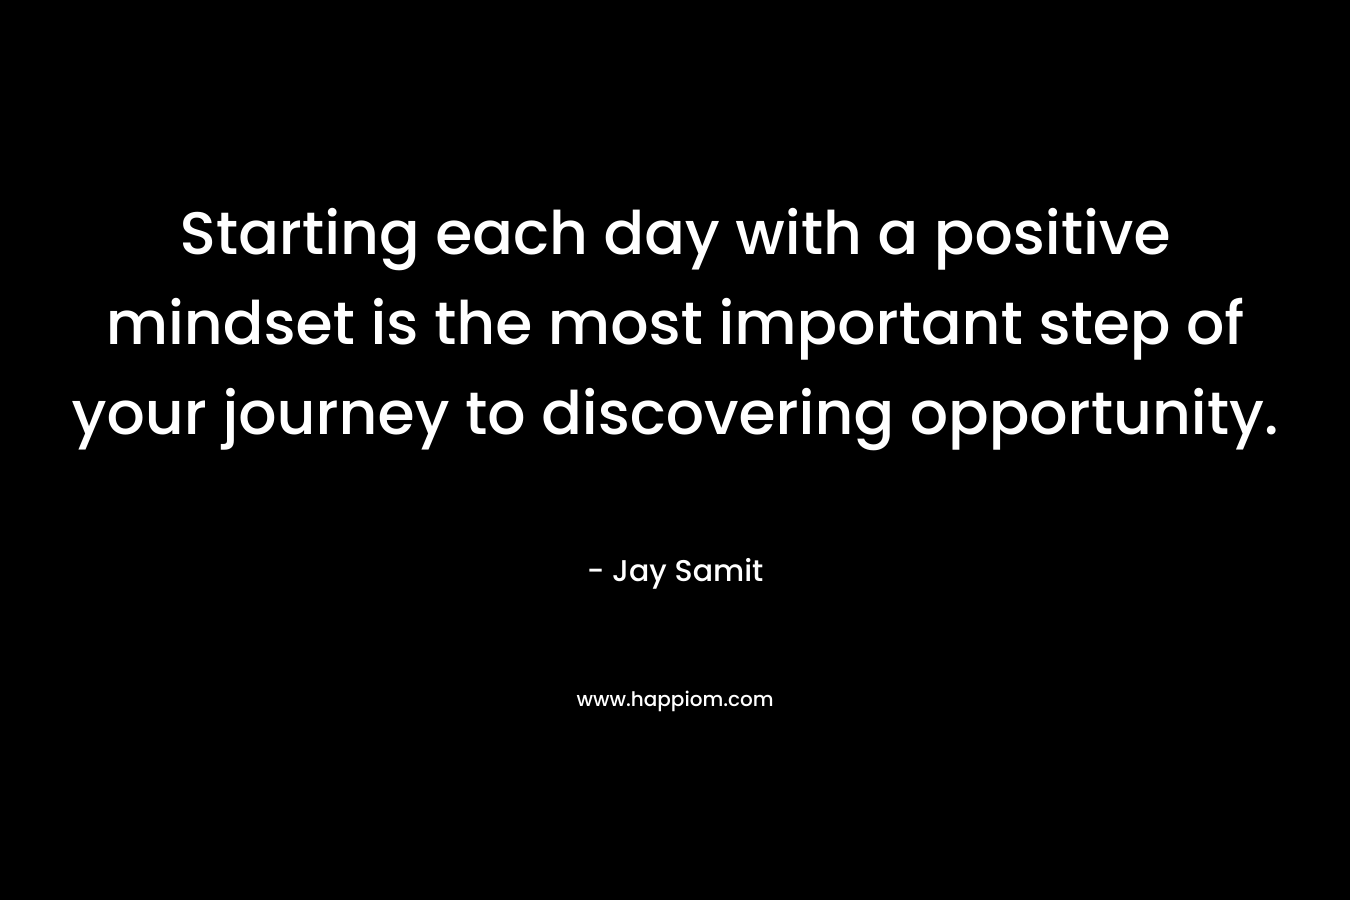 Starting each day with a positive mindset is the most important step of your journey to discovering opportunity.